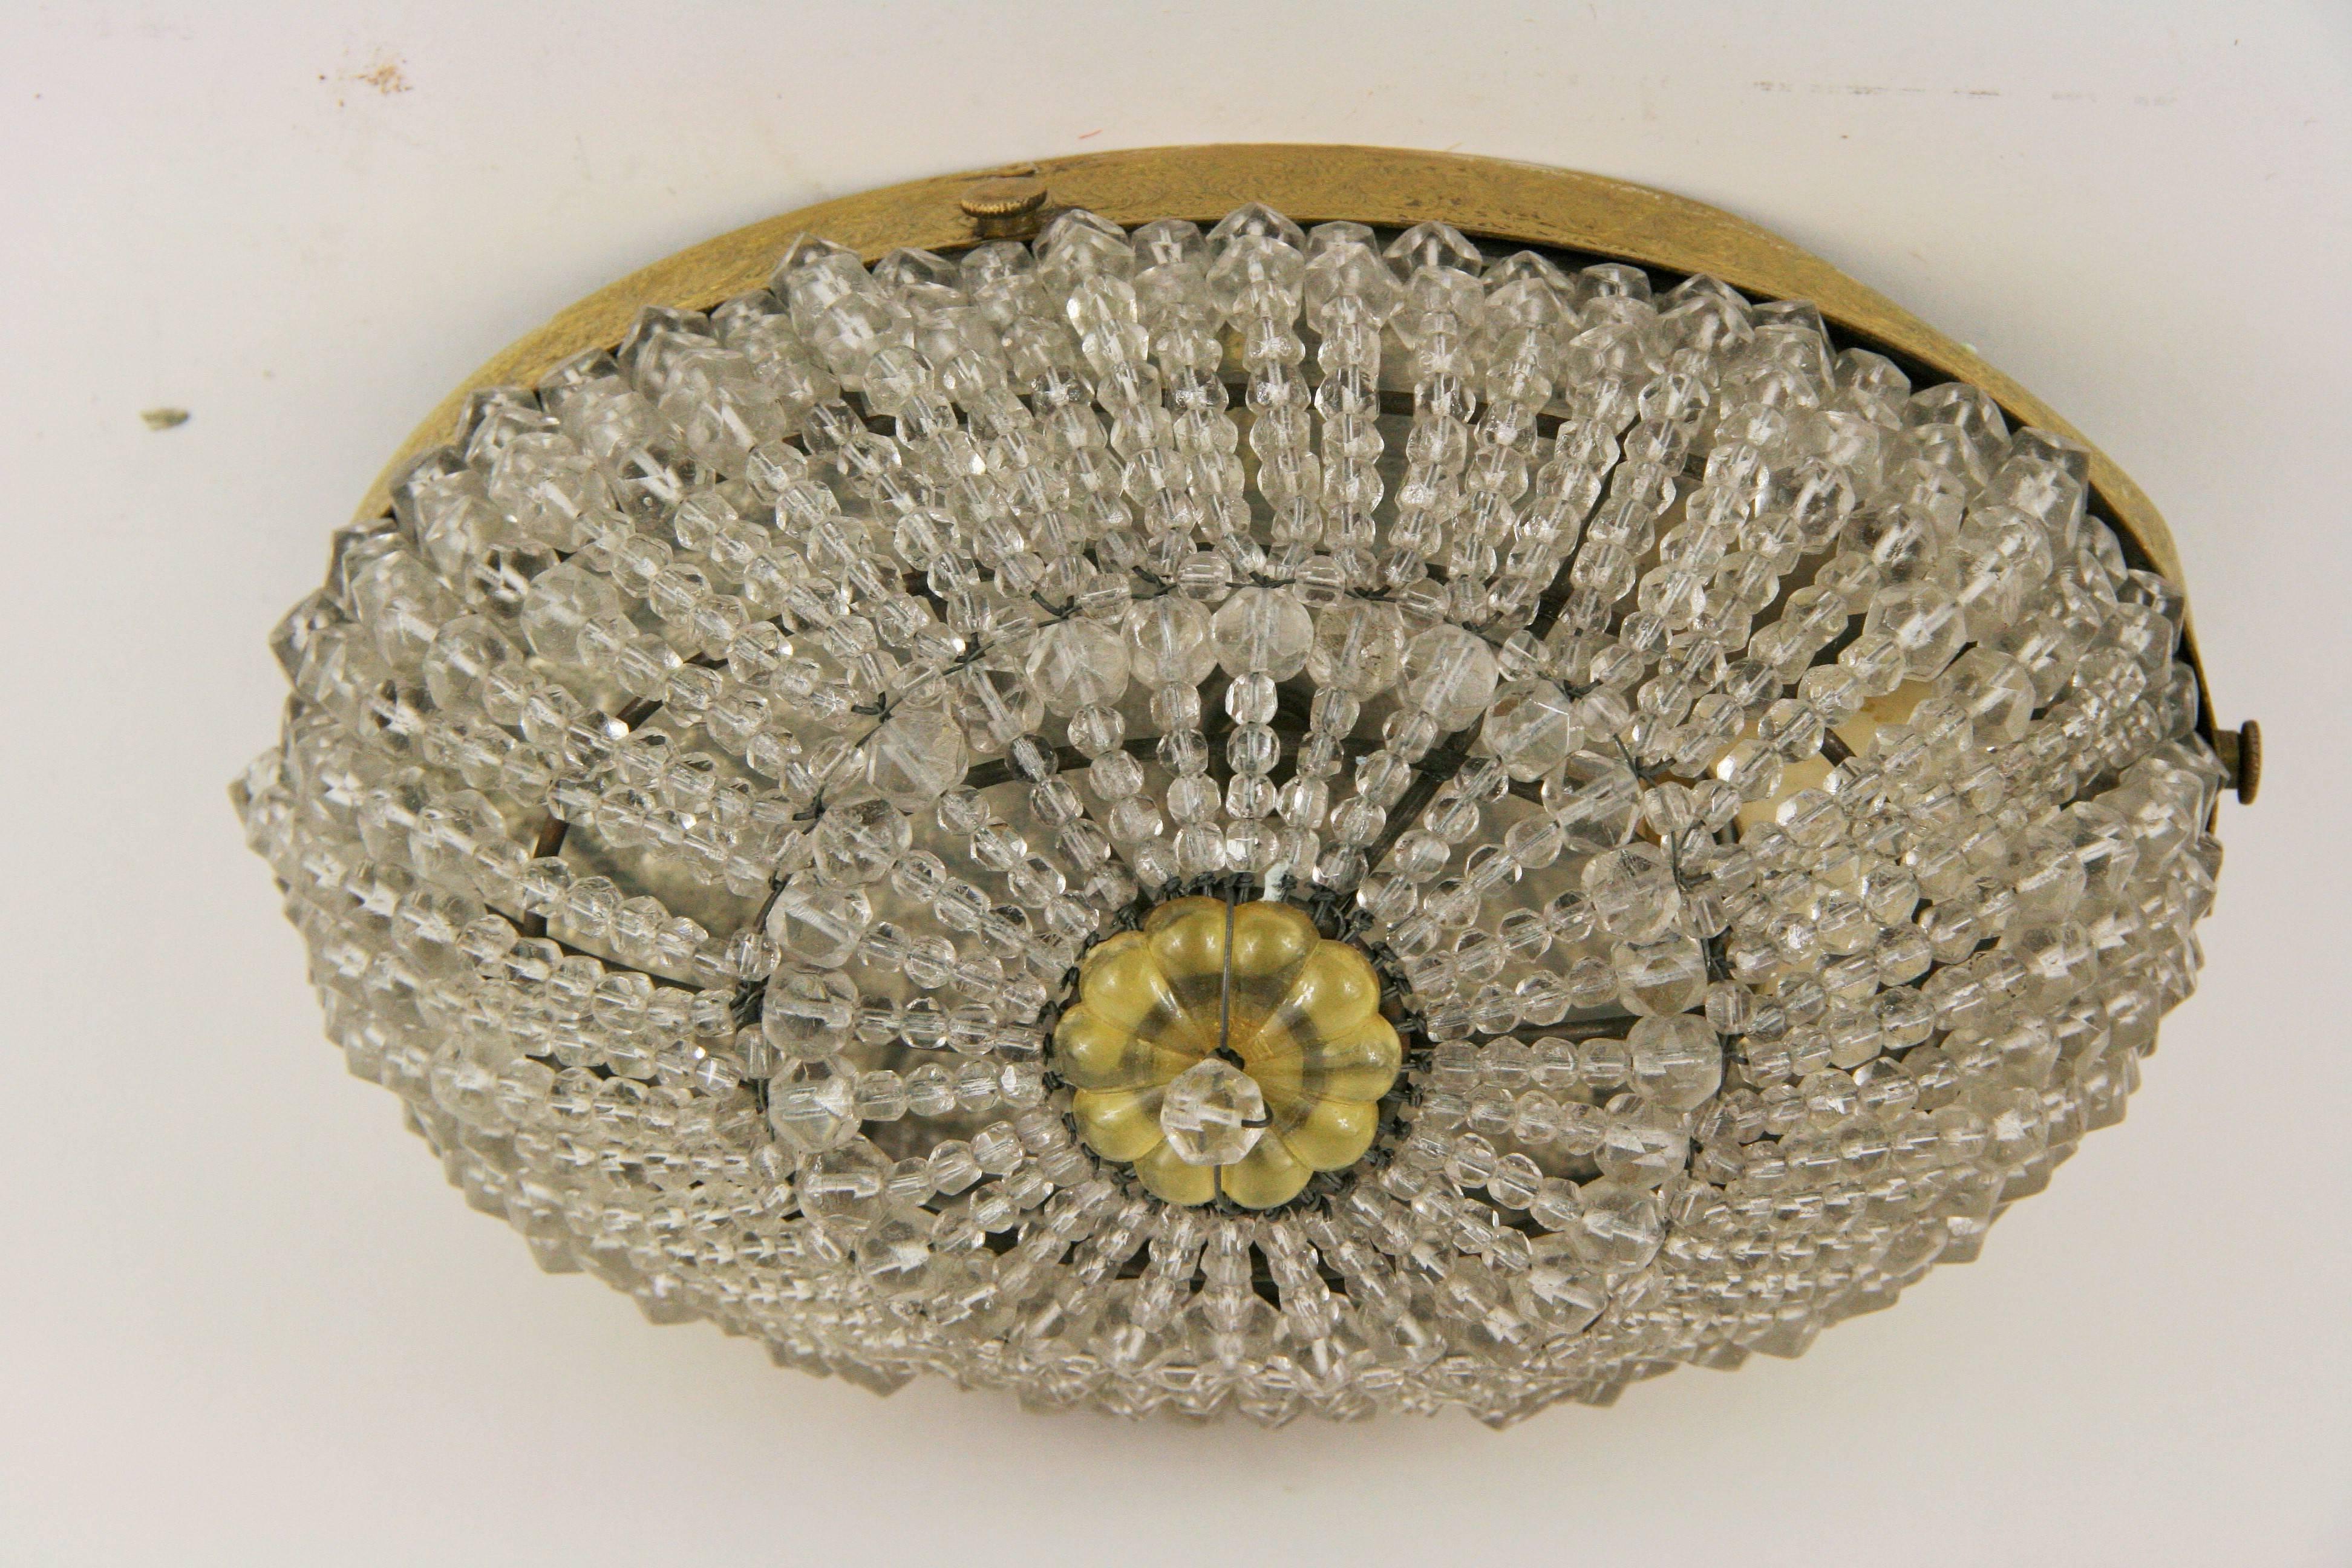 1-2965, a brass and crystal flush mount, circa 1930s.
Takes on 75watt bulb
Newly rewired.